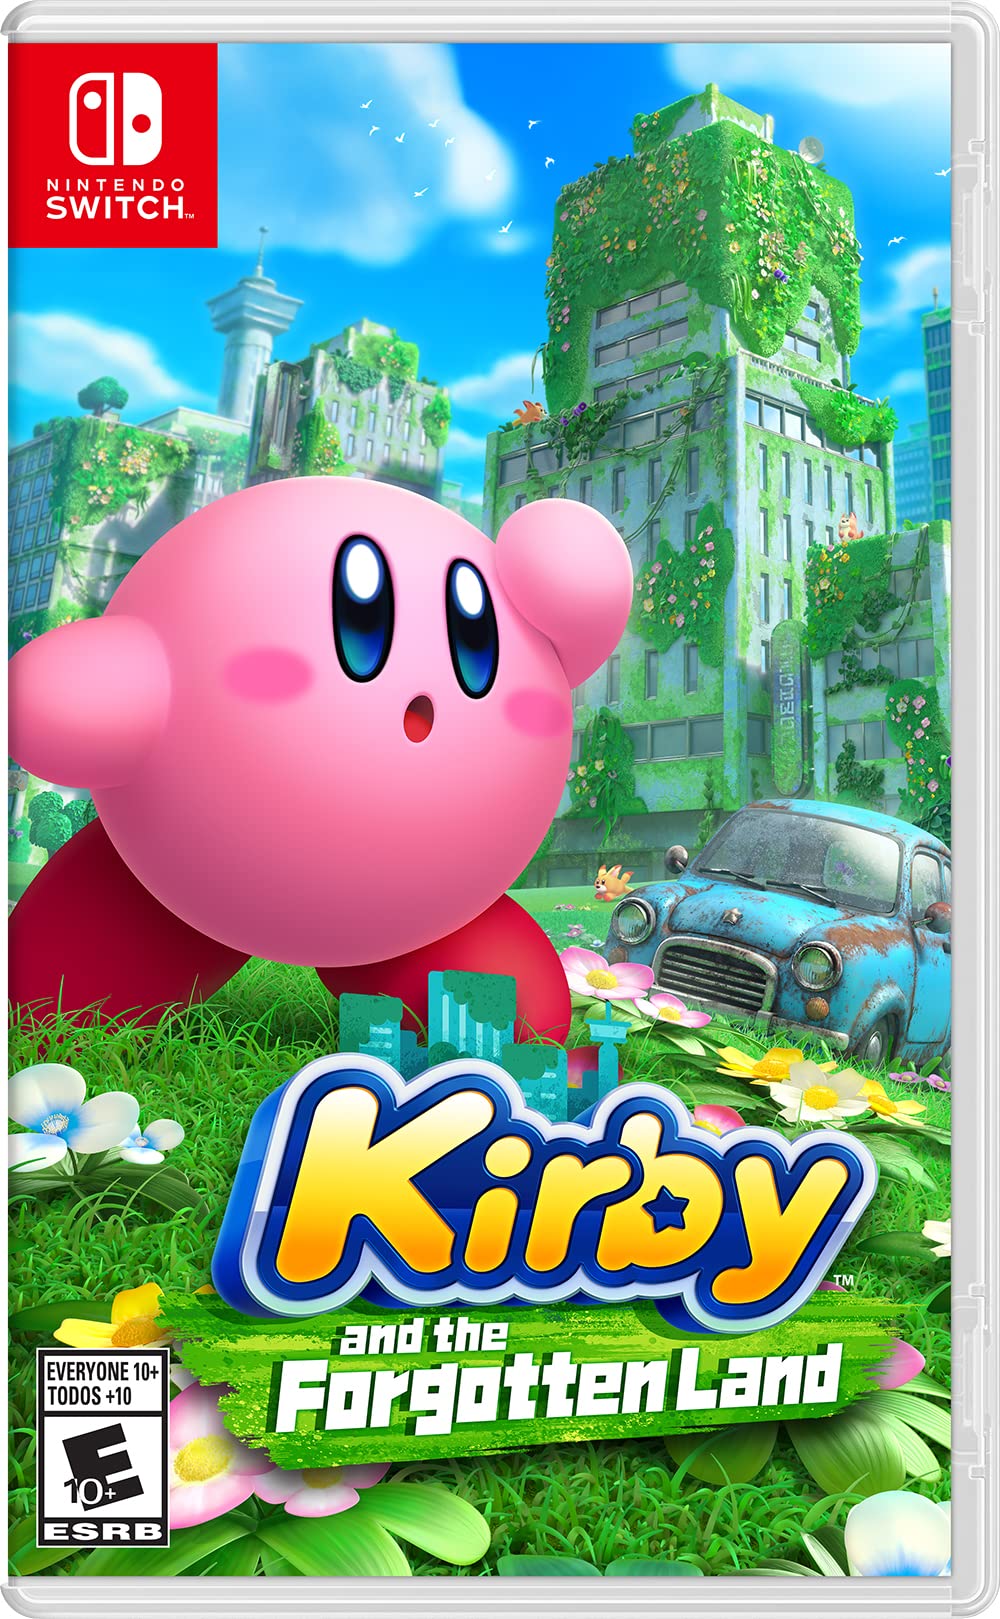 Kirby and the Forgotten Land - Nintendo Switch Physical Copy - $54.99 at Amazon